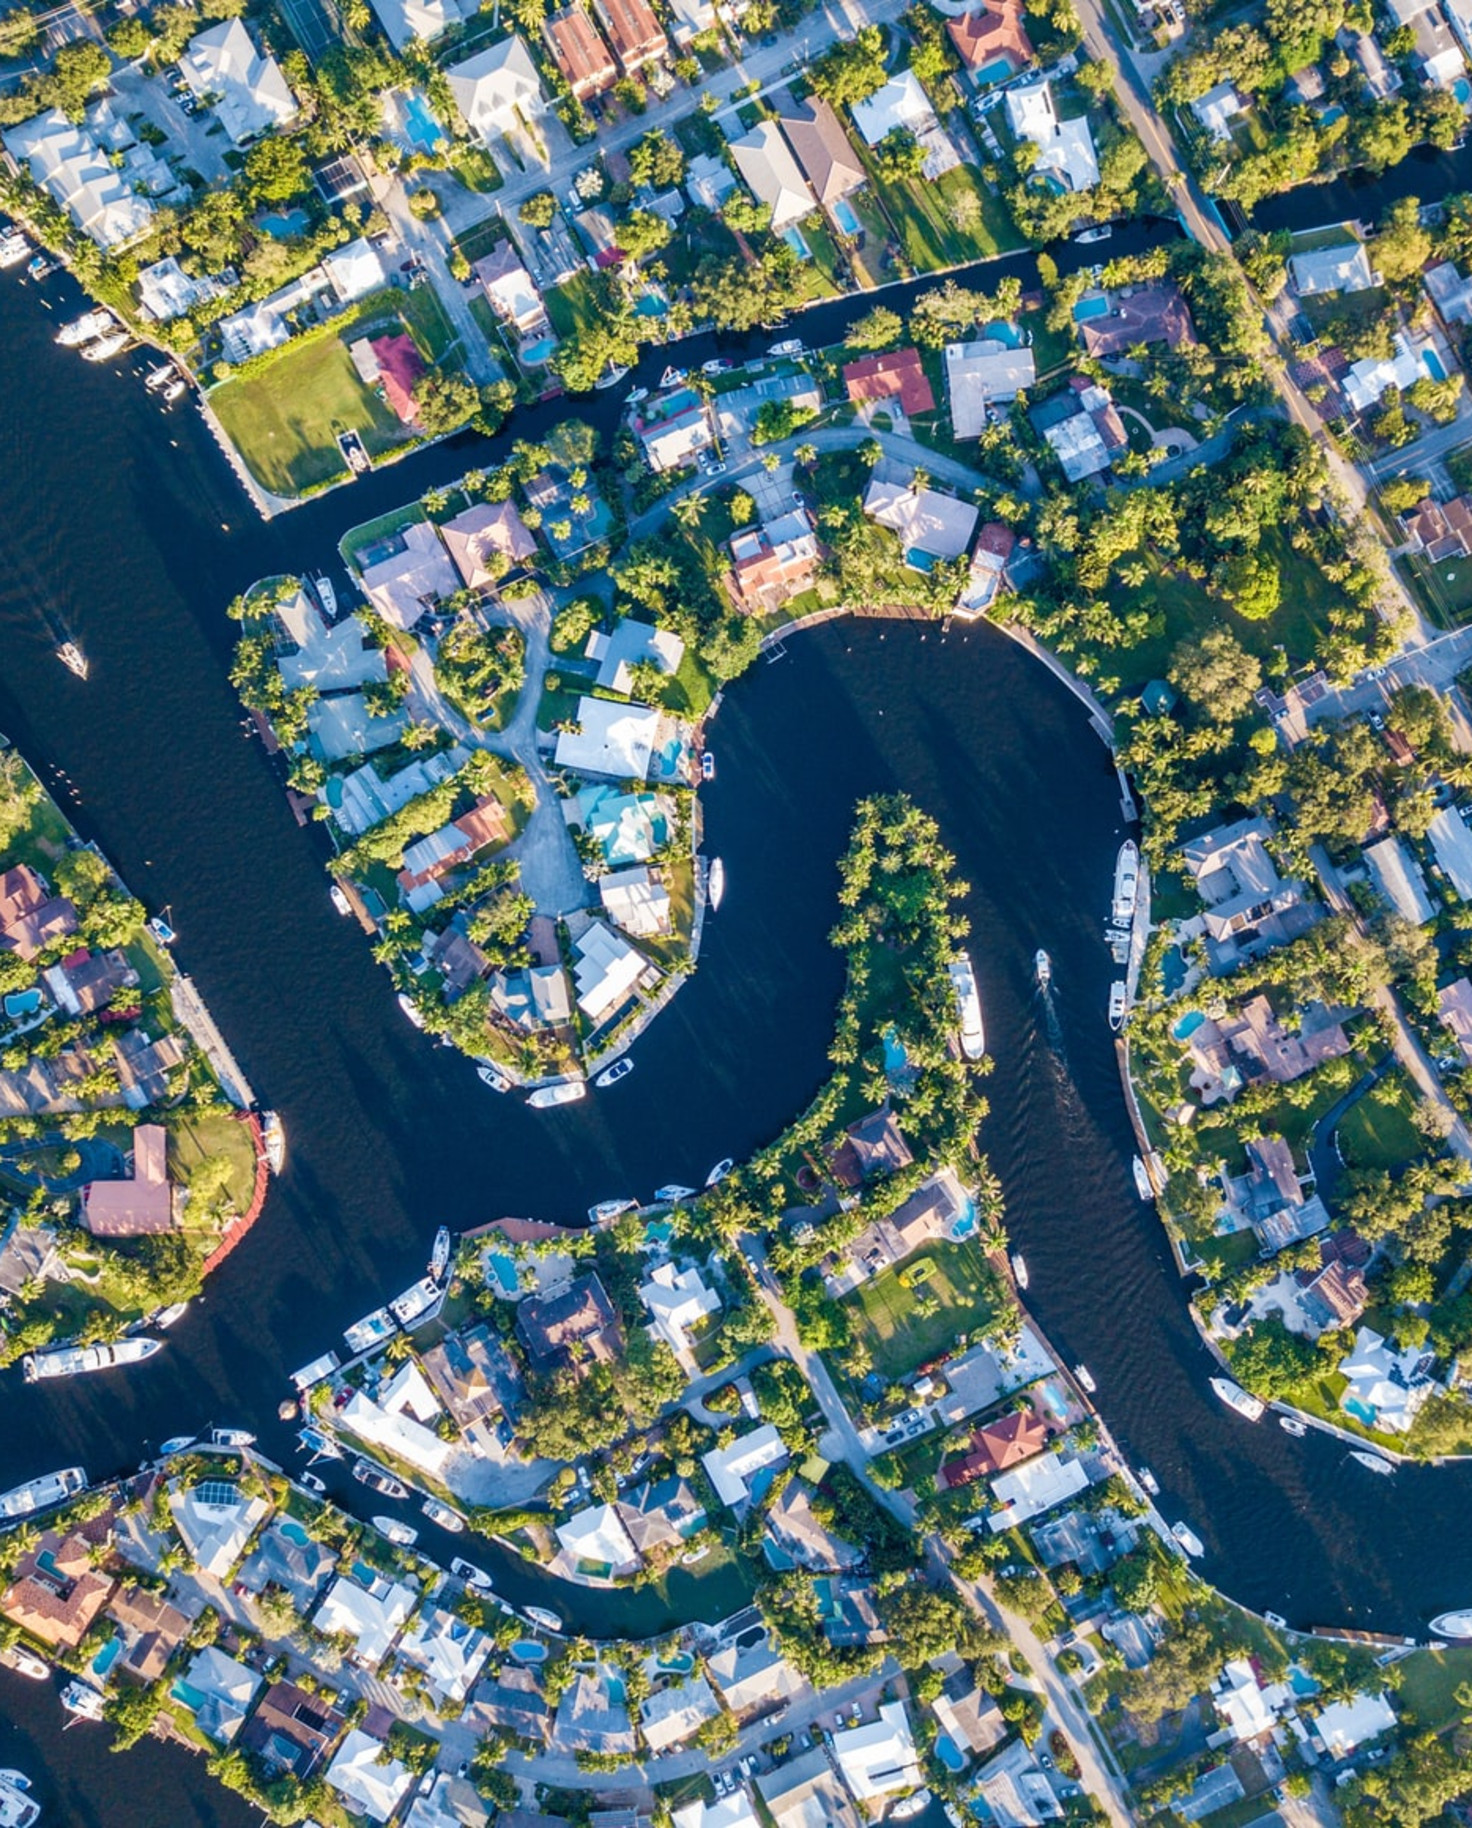 birdseye view of fort lauderdale florida with river and houses and green trees and lawns